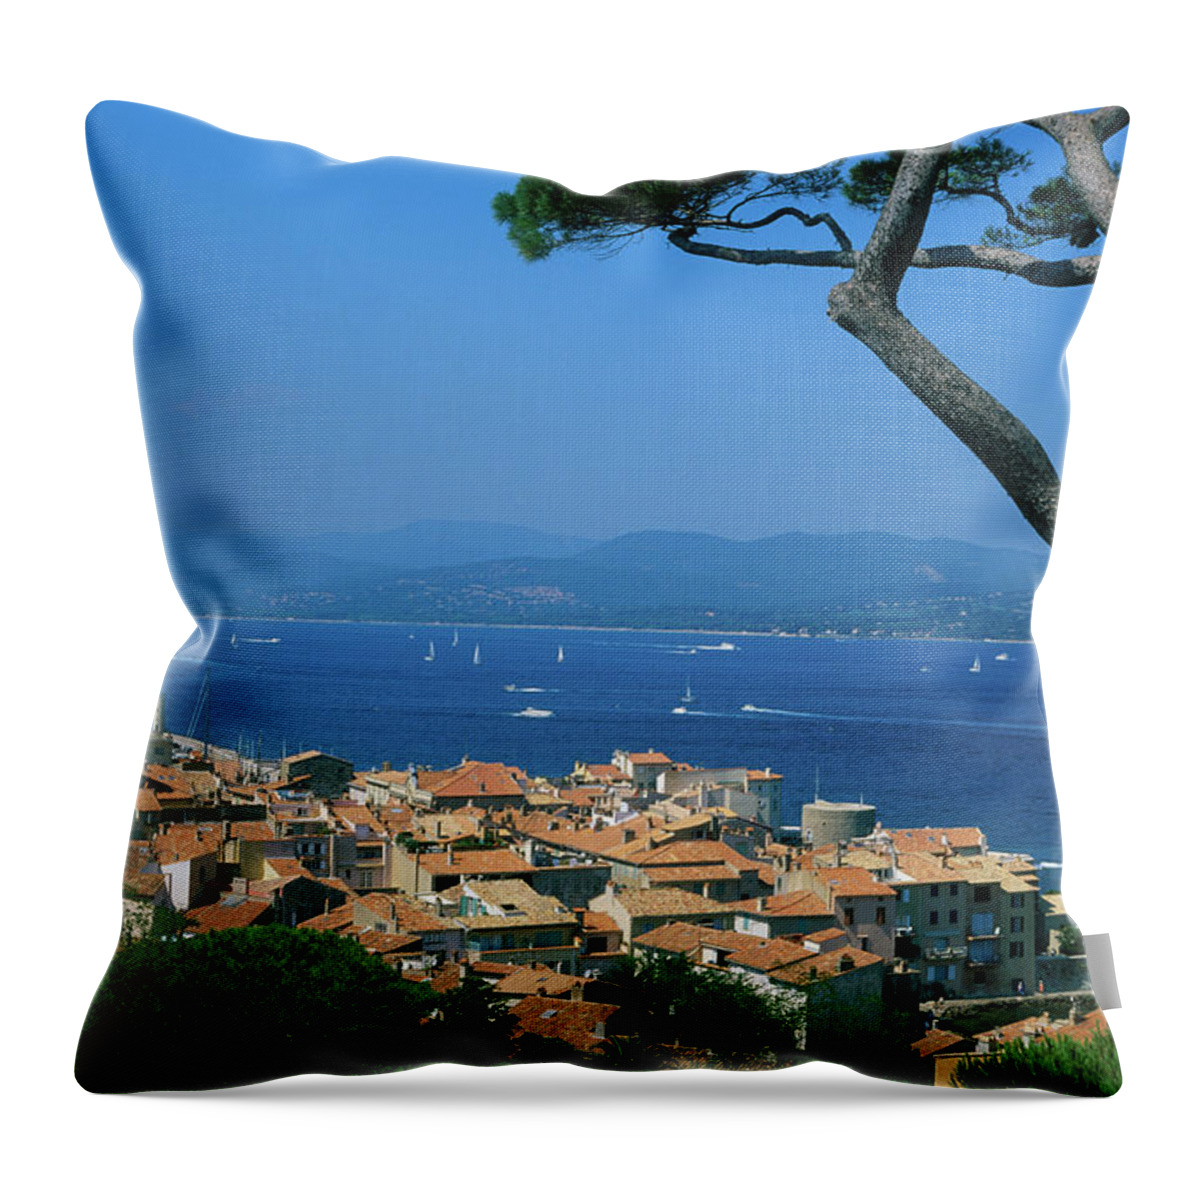 Scenics Throw Pillow featuring the photograph Saint-tropez - Provence by Martial Colomb